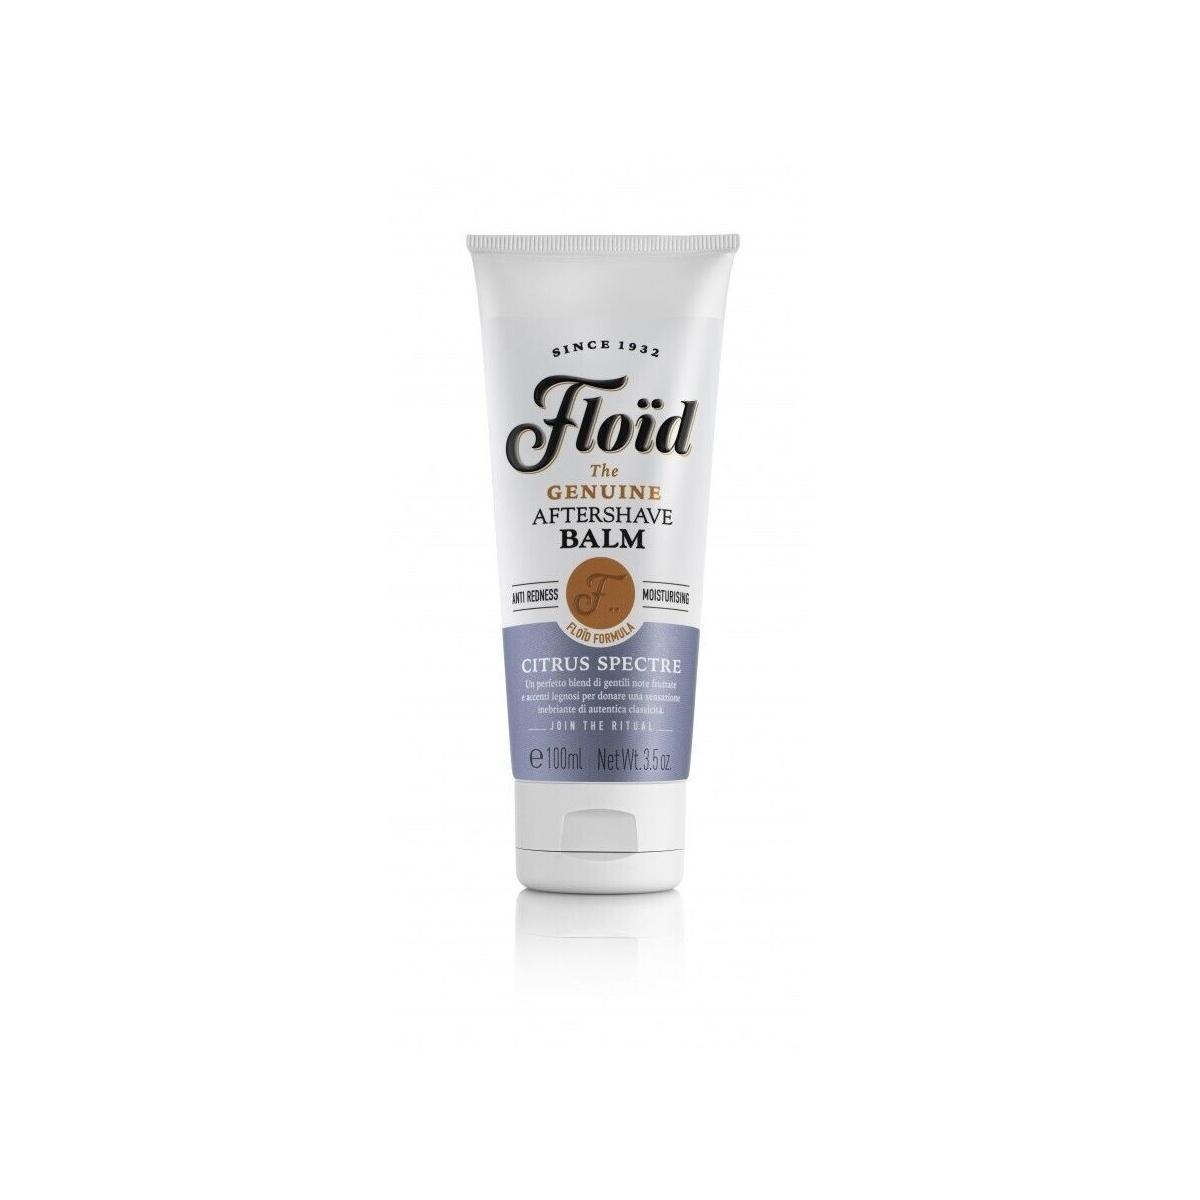 Floid The Genuine - After Shave Balm Citrus Spectre 100 ml